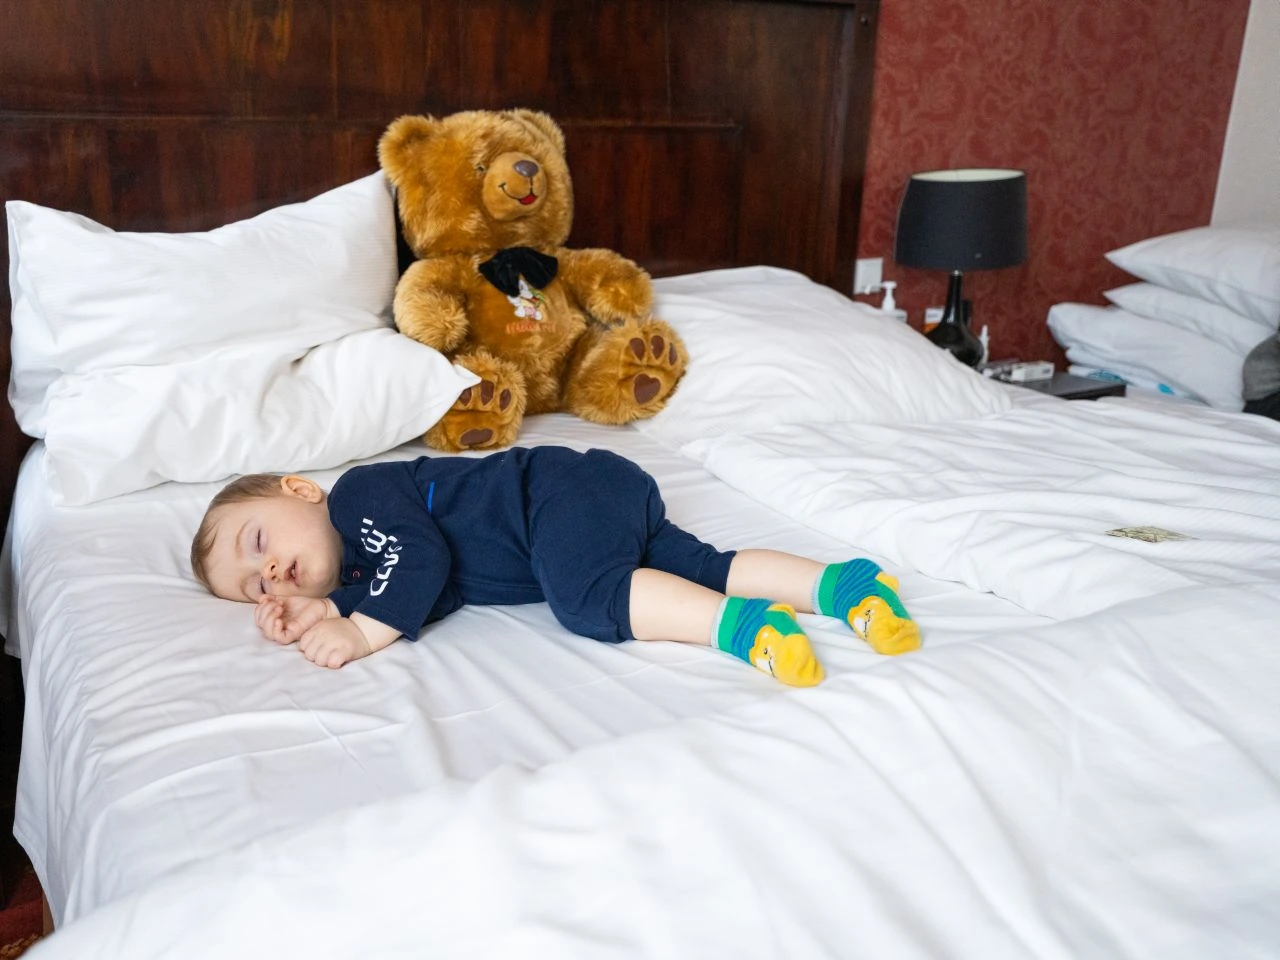 Timofy sleeps on a bed with his bear in a hotel in Krakow, Poland